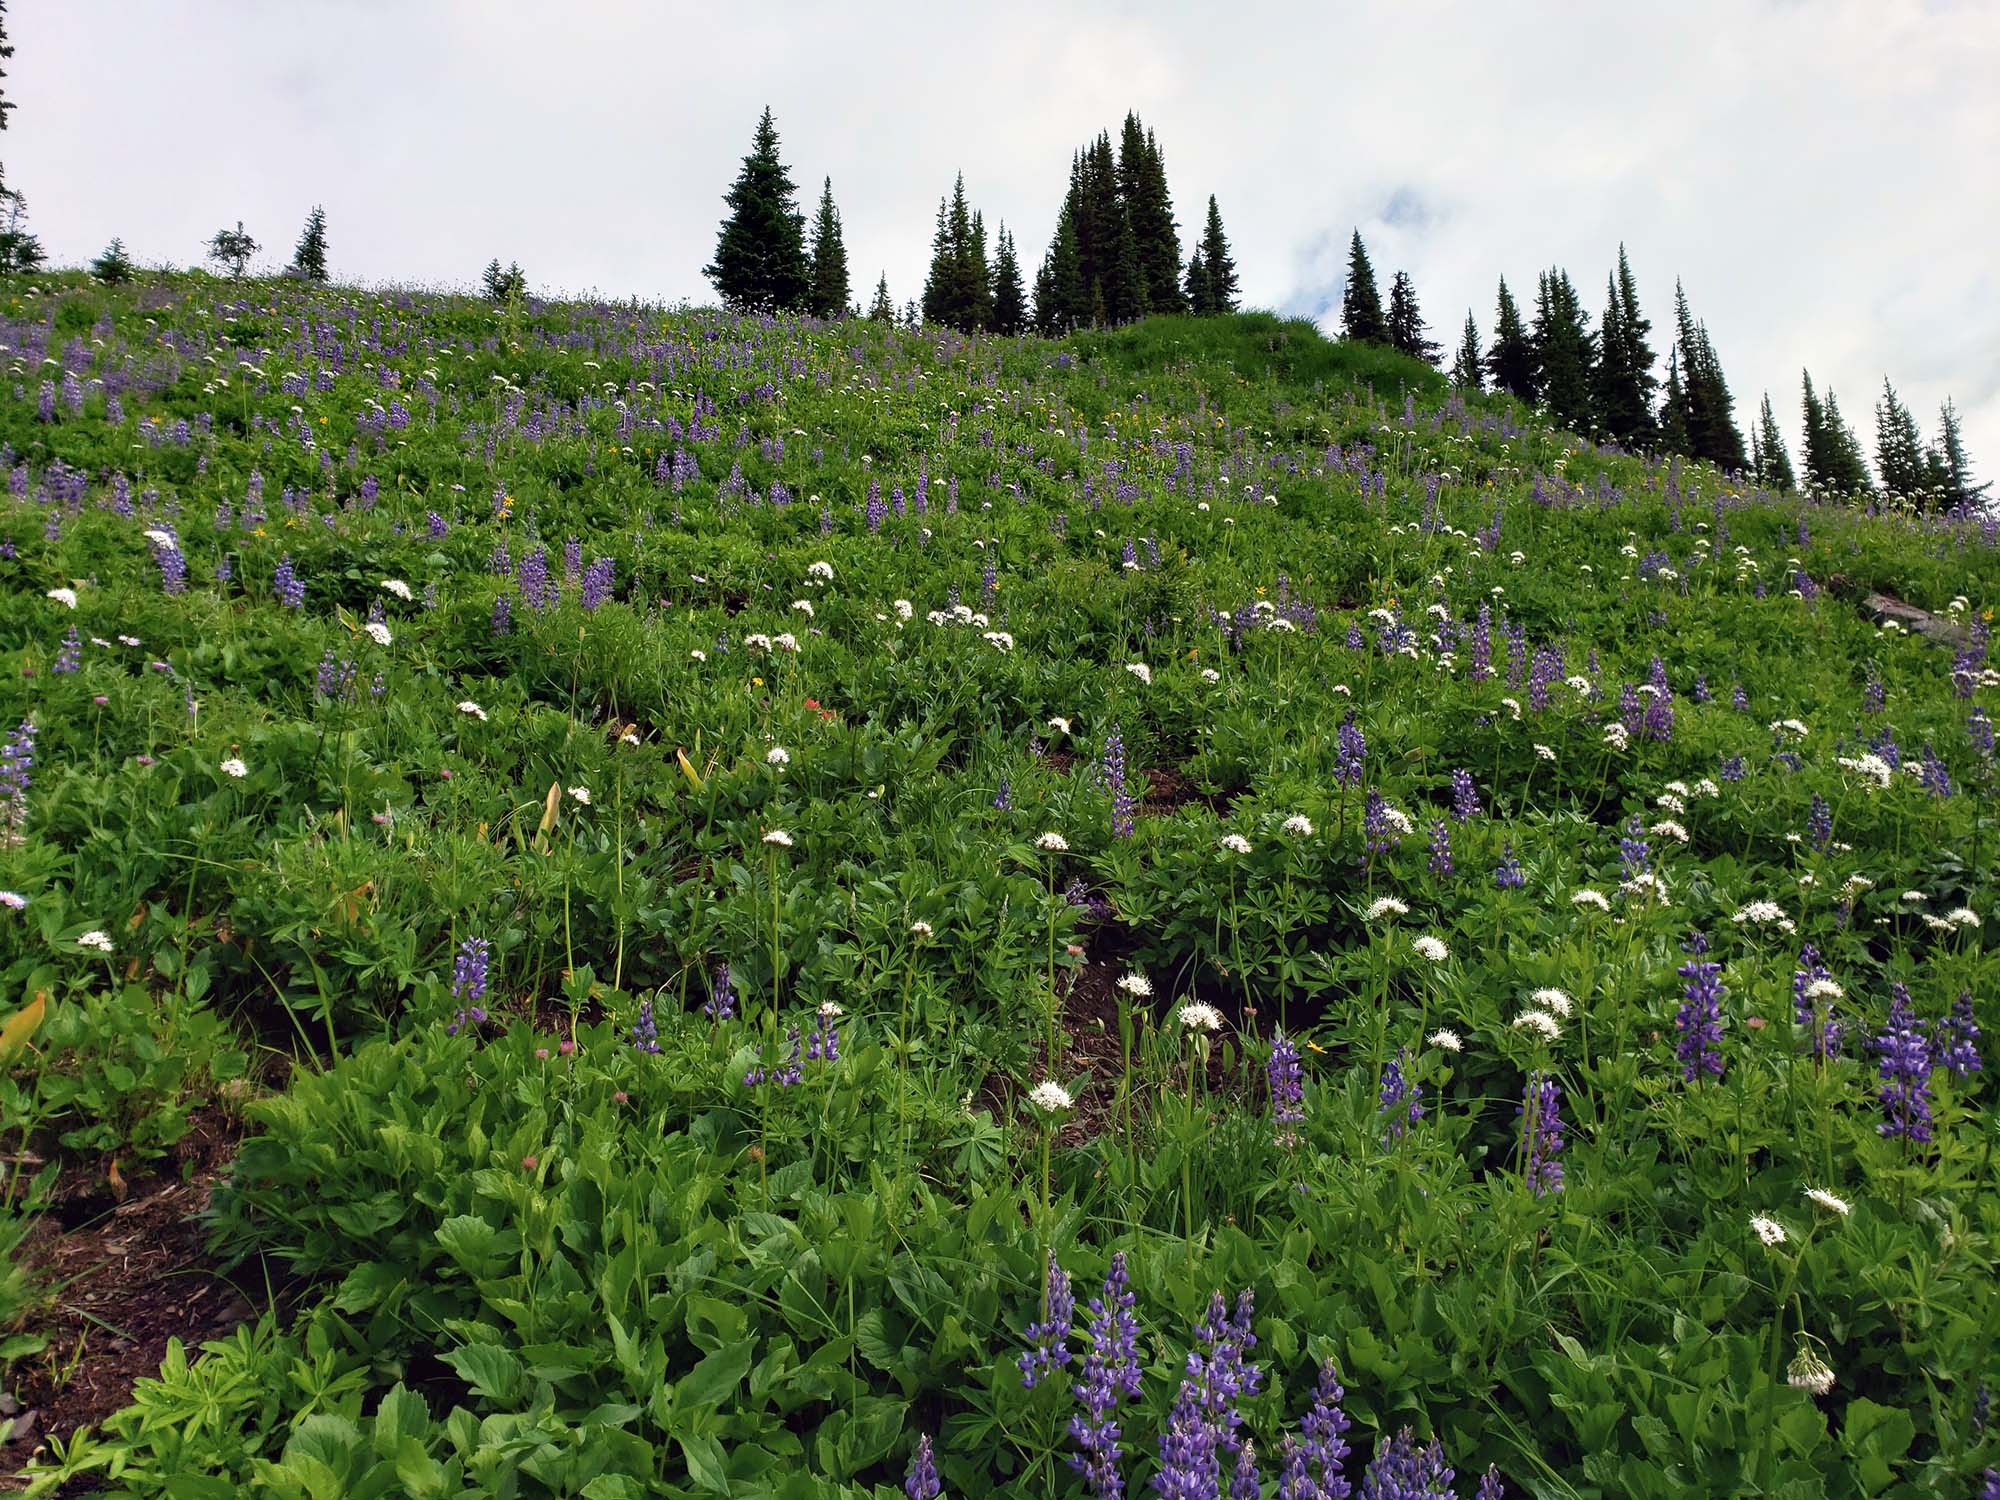 A meadow on the slope of a hill, with white and purple flowers